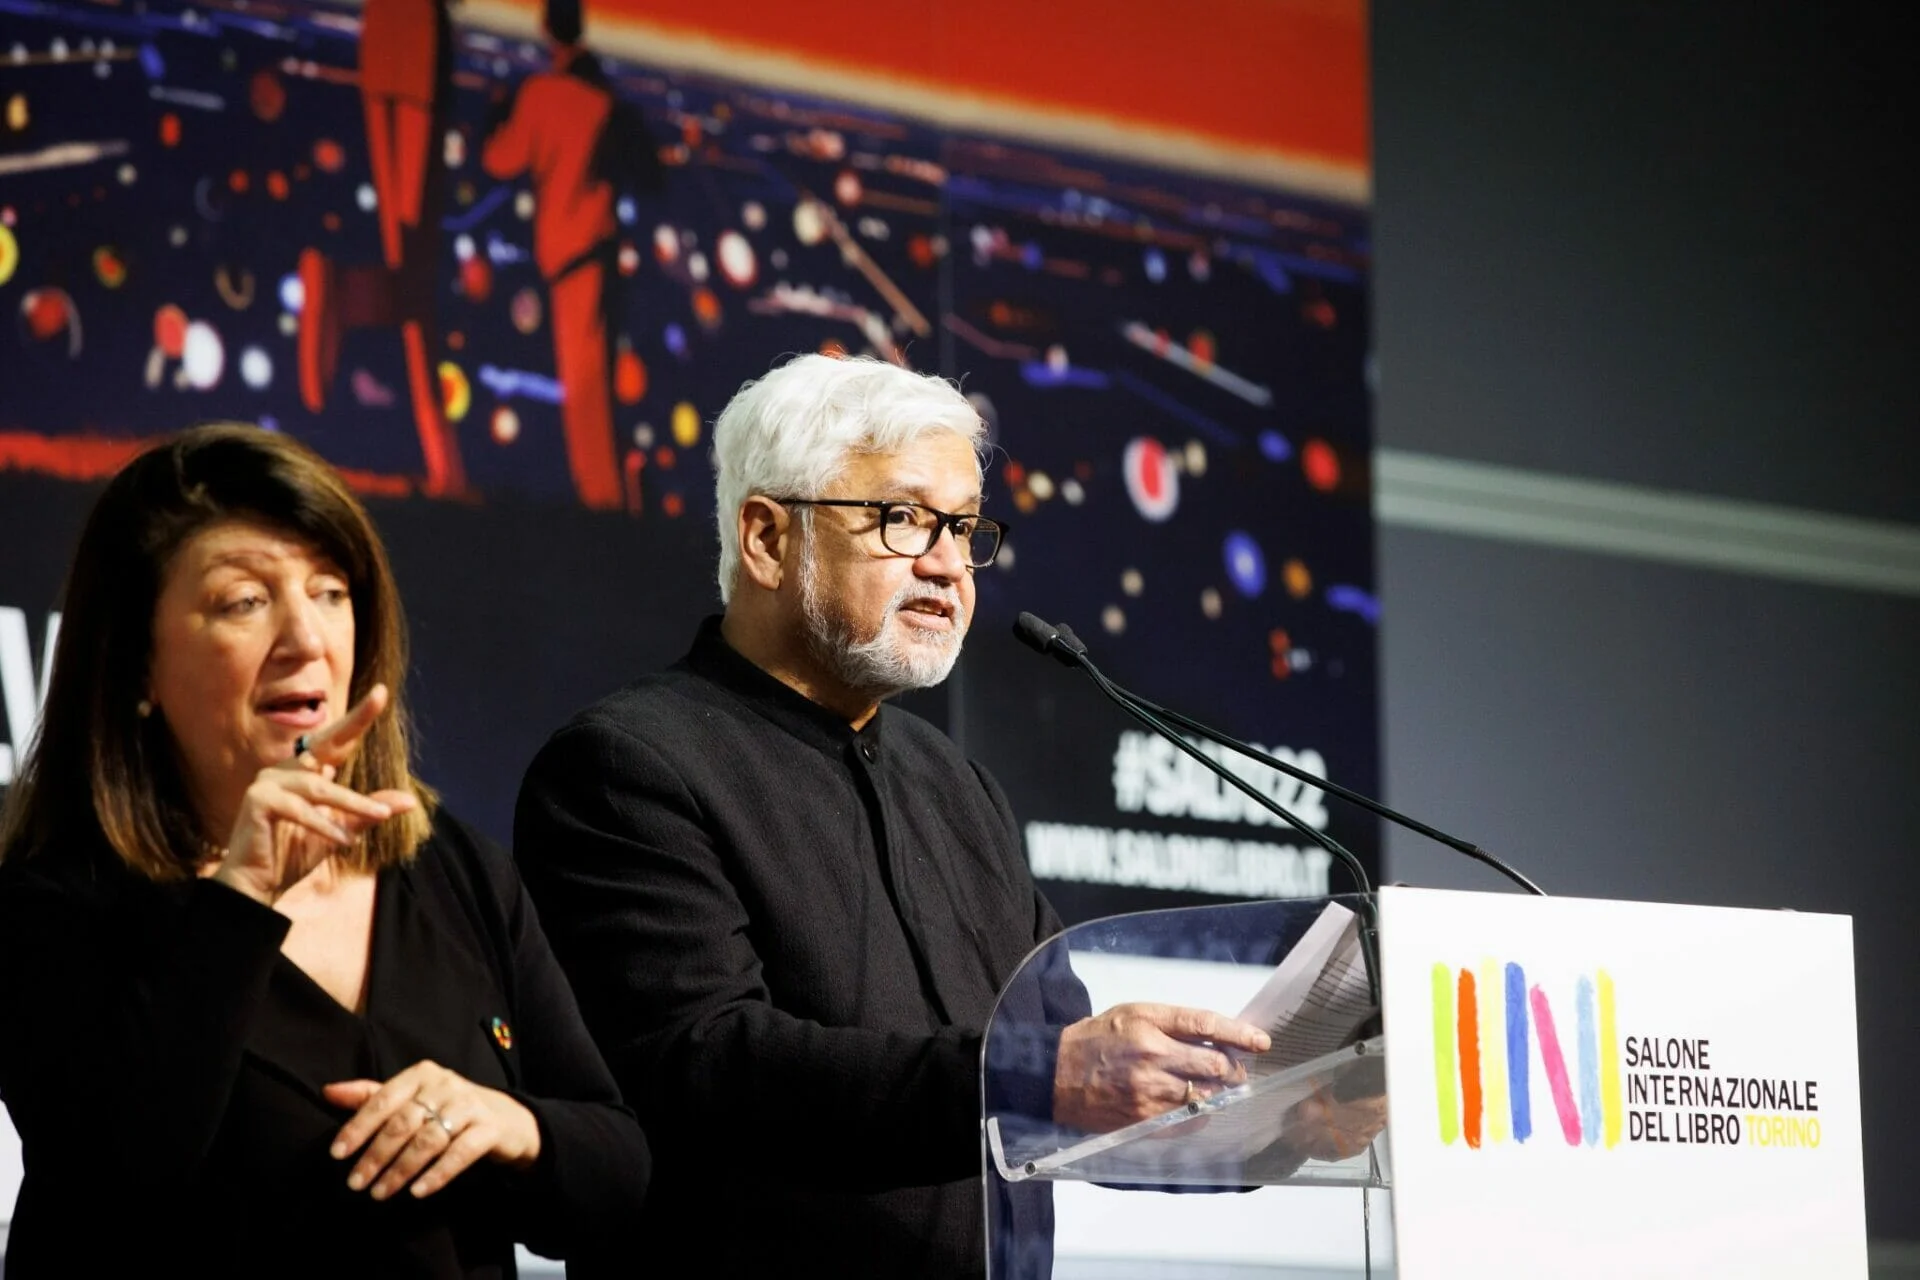 The voice of non-humans | Amitav Ghosh and Paolo Cognetti